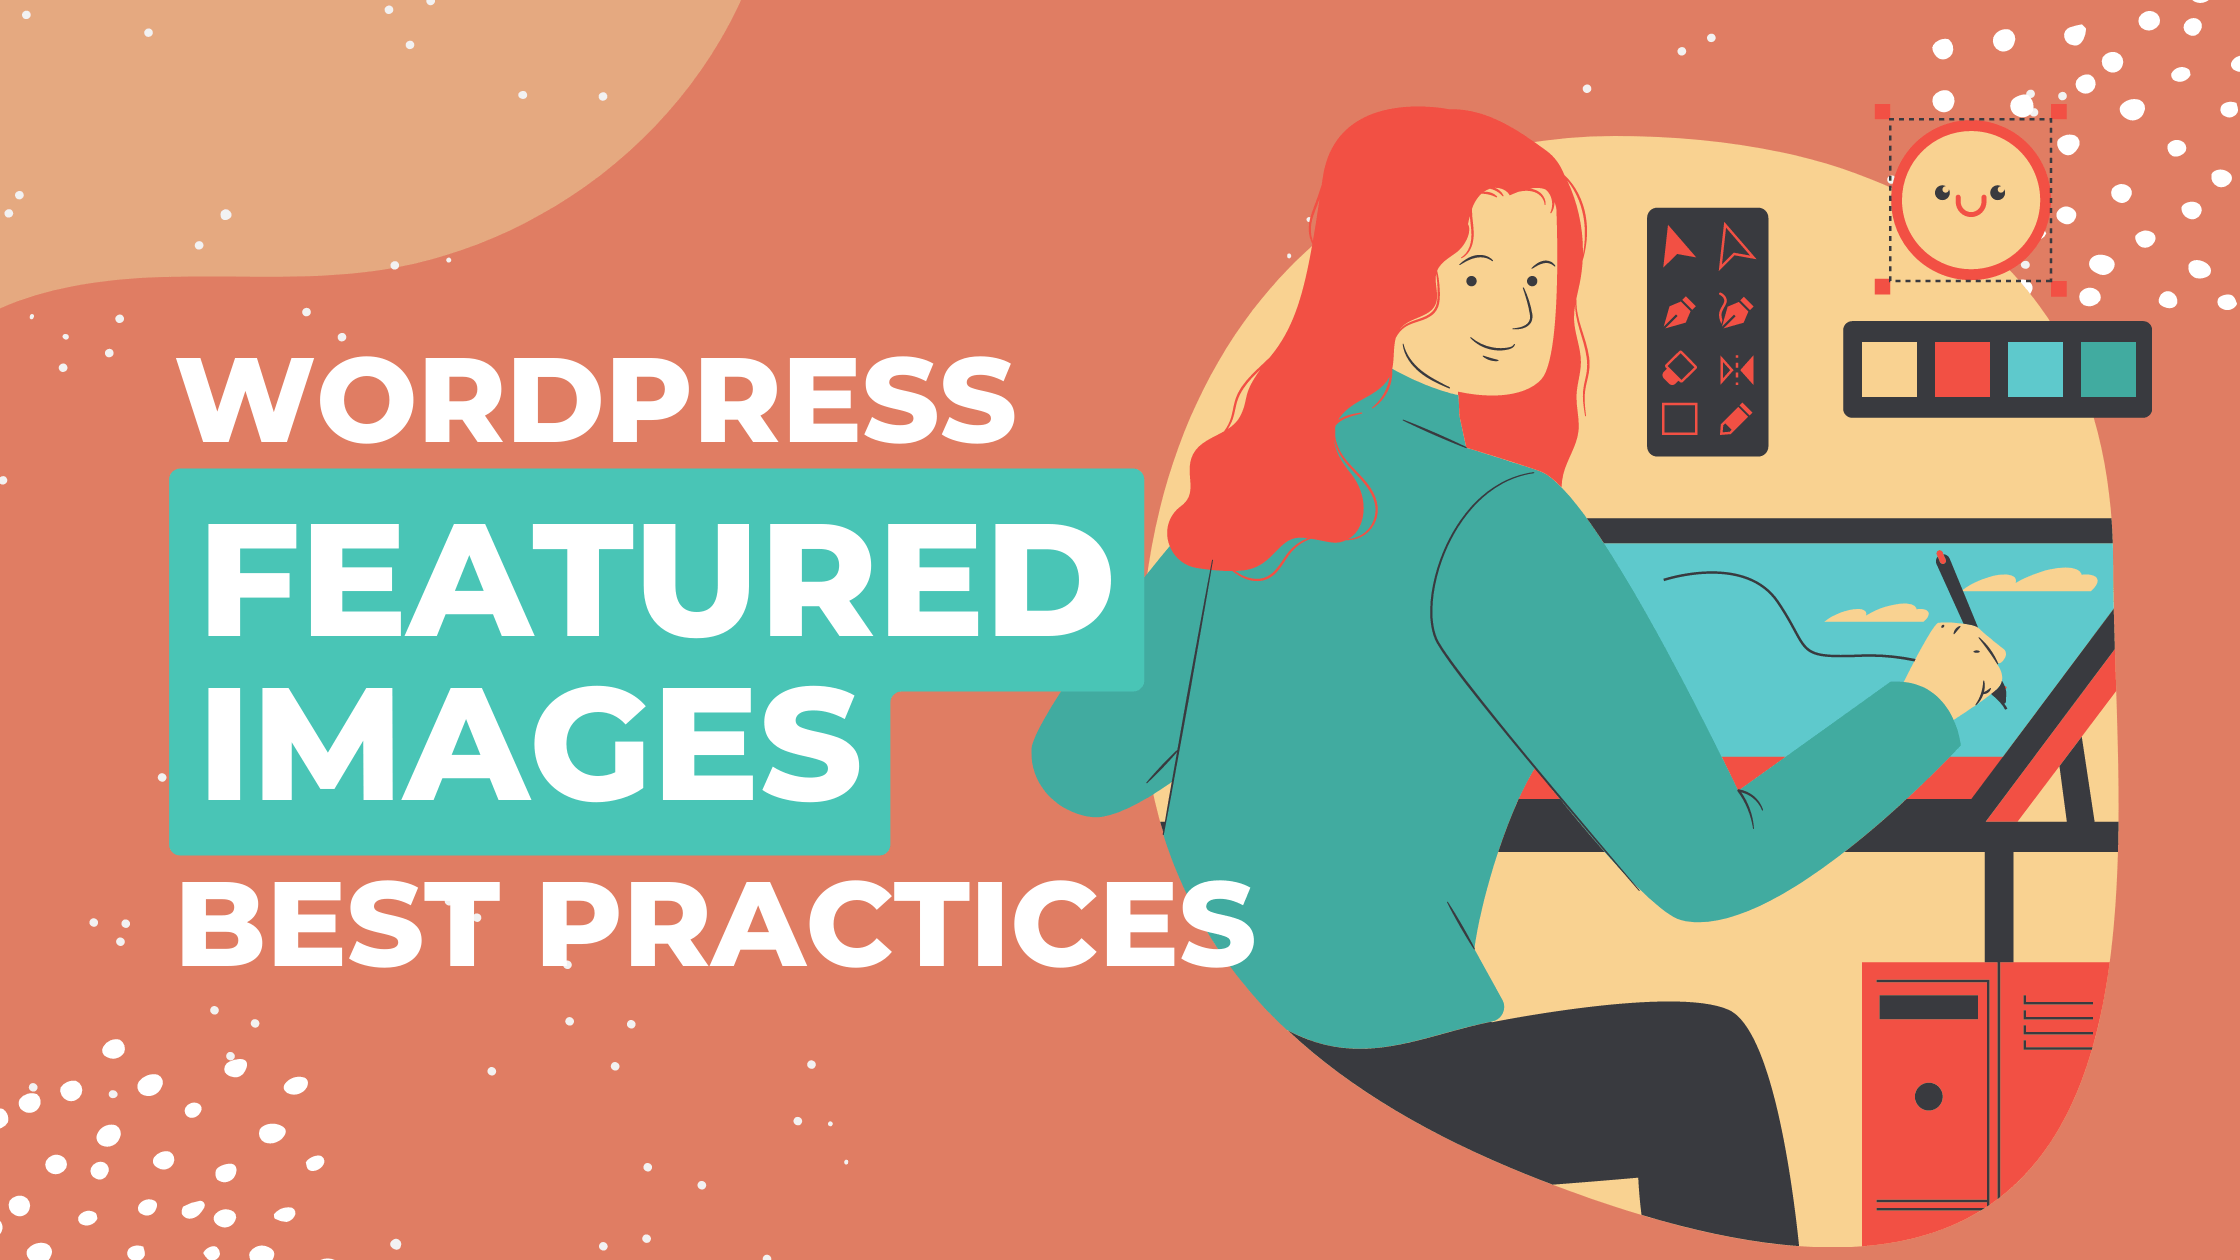 WordPress Featured Images: Tips and Best Practices